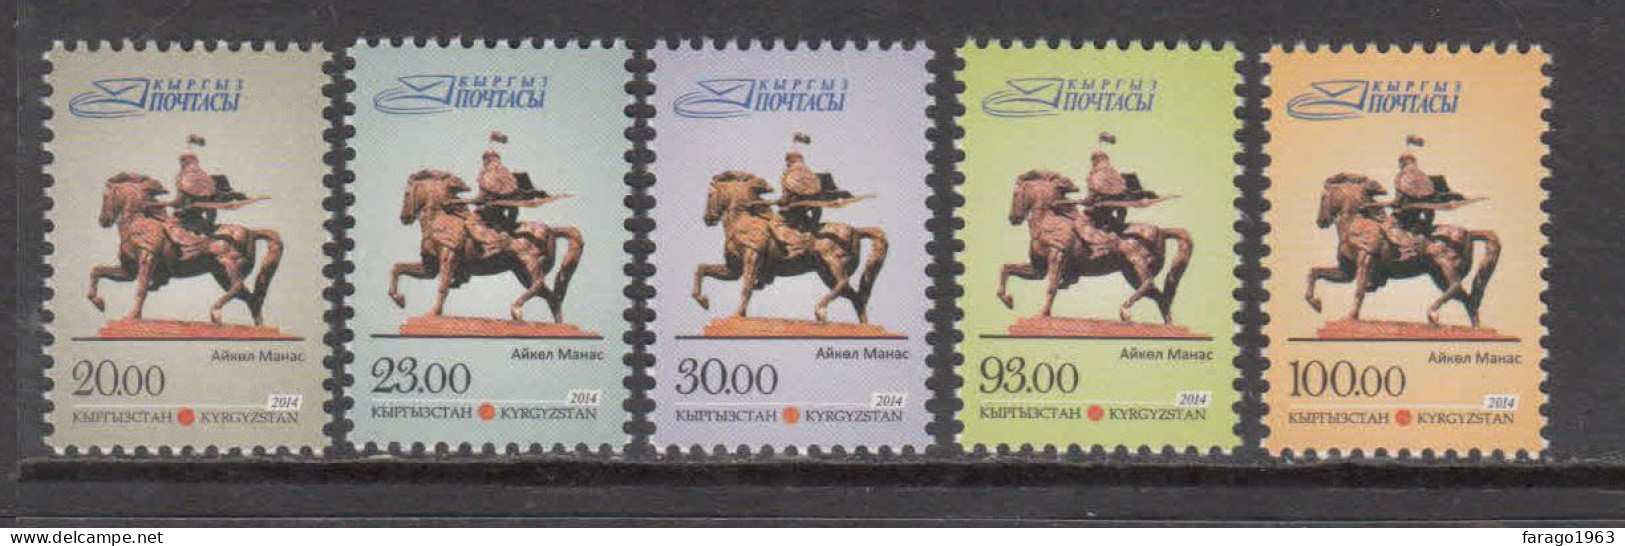 2014 Kyrgyzstan Manas Monument Horses Complete Set Of 5 MNH - Kirghizstan